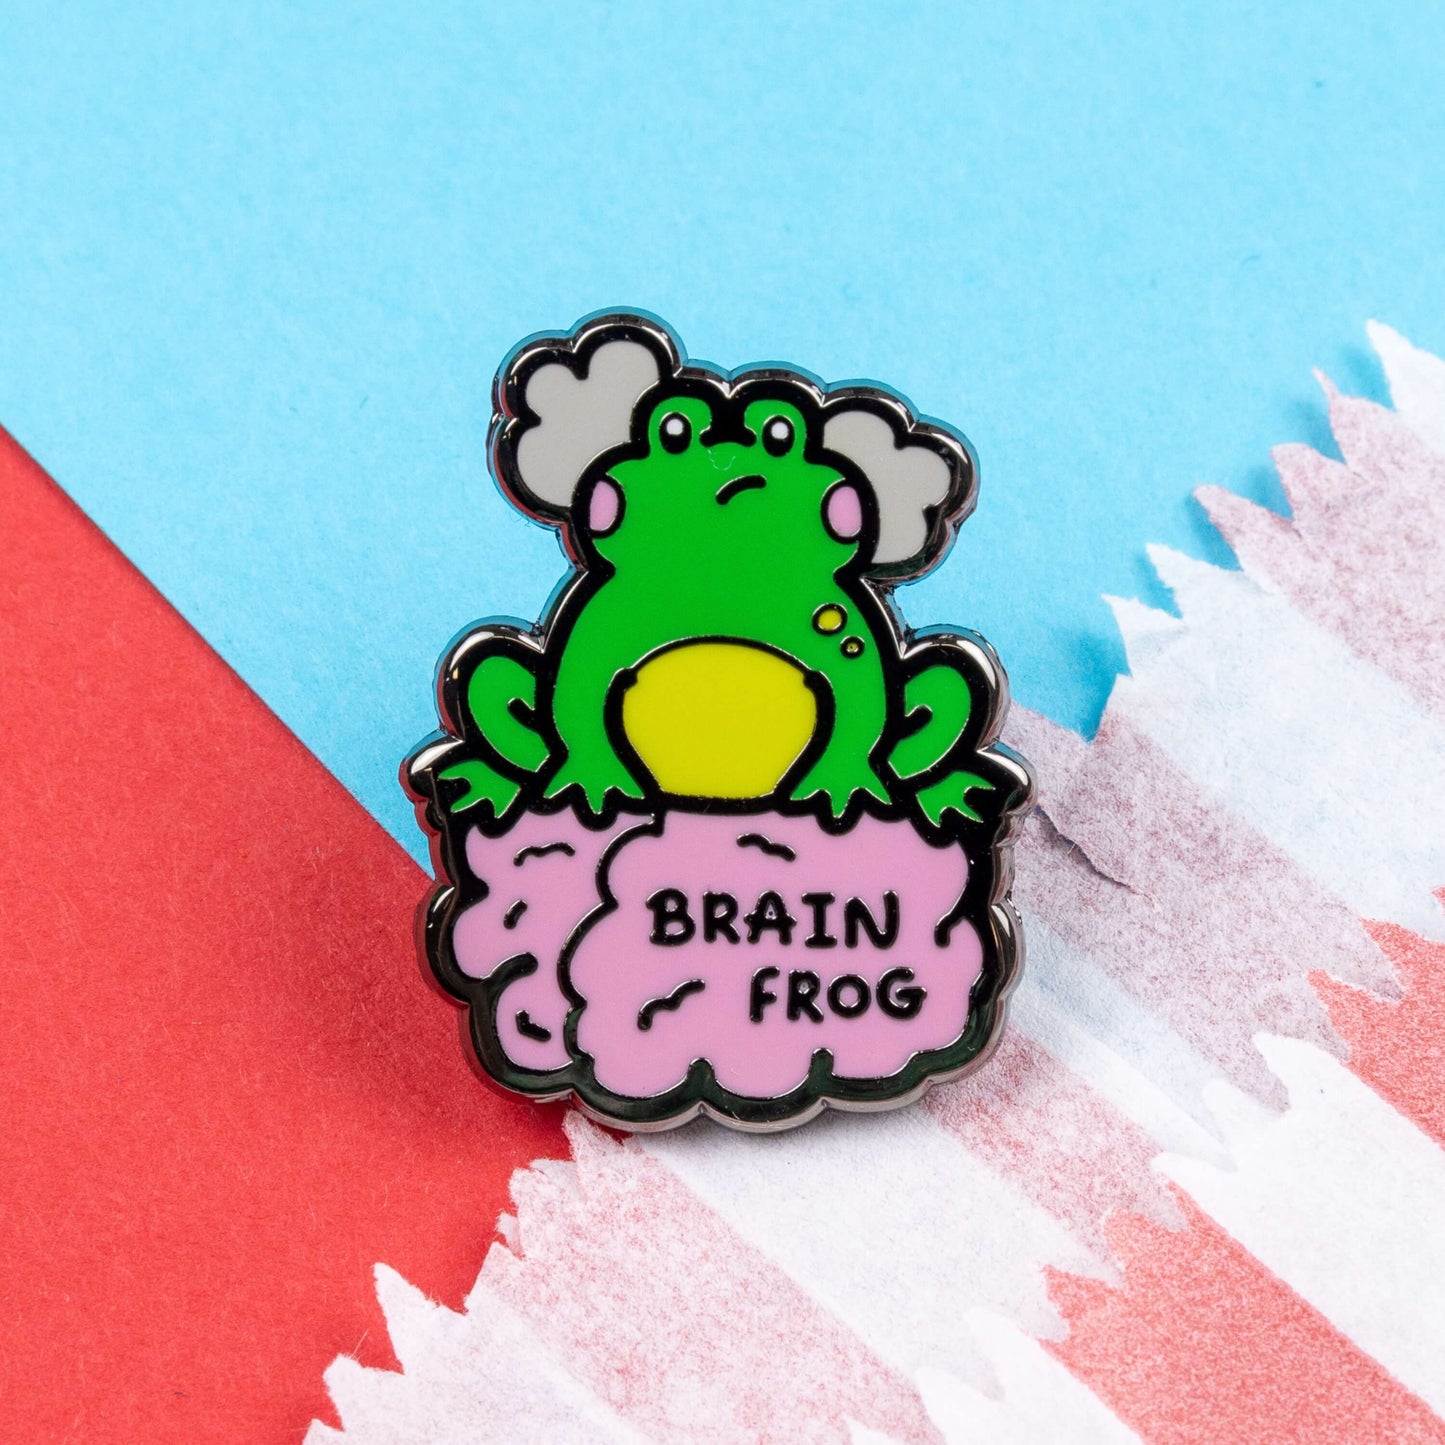 The Brain Frog Enamel Pin - Brain Fog on a blue and red card background. The pin is of a green frog with pink blush cheeks looking confused with two grey clouds by its head, it is sat on a pink brain with the text reading Brain Frog. The design is raising awareness for brain fog.